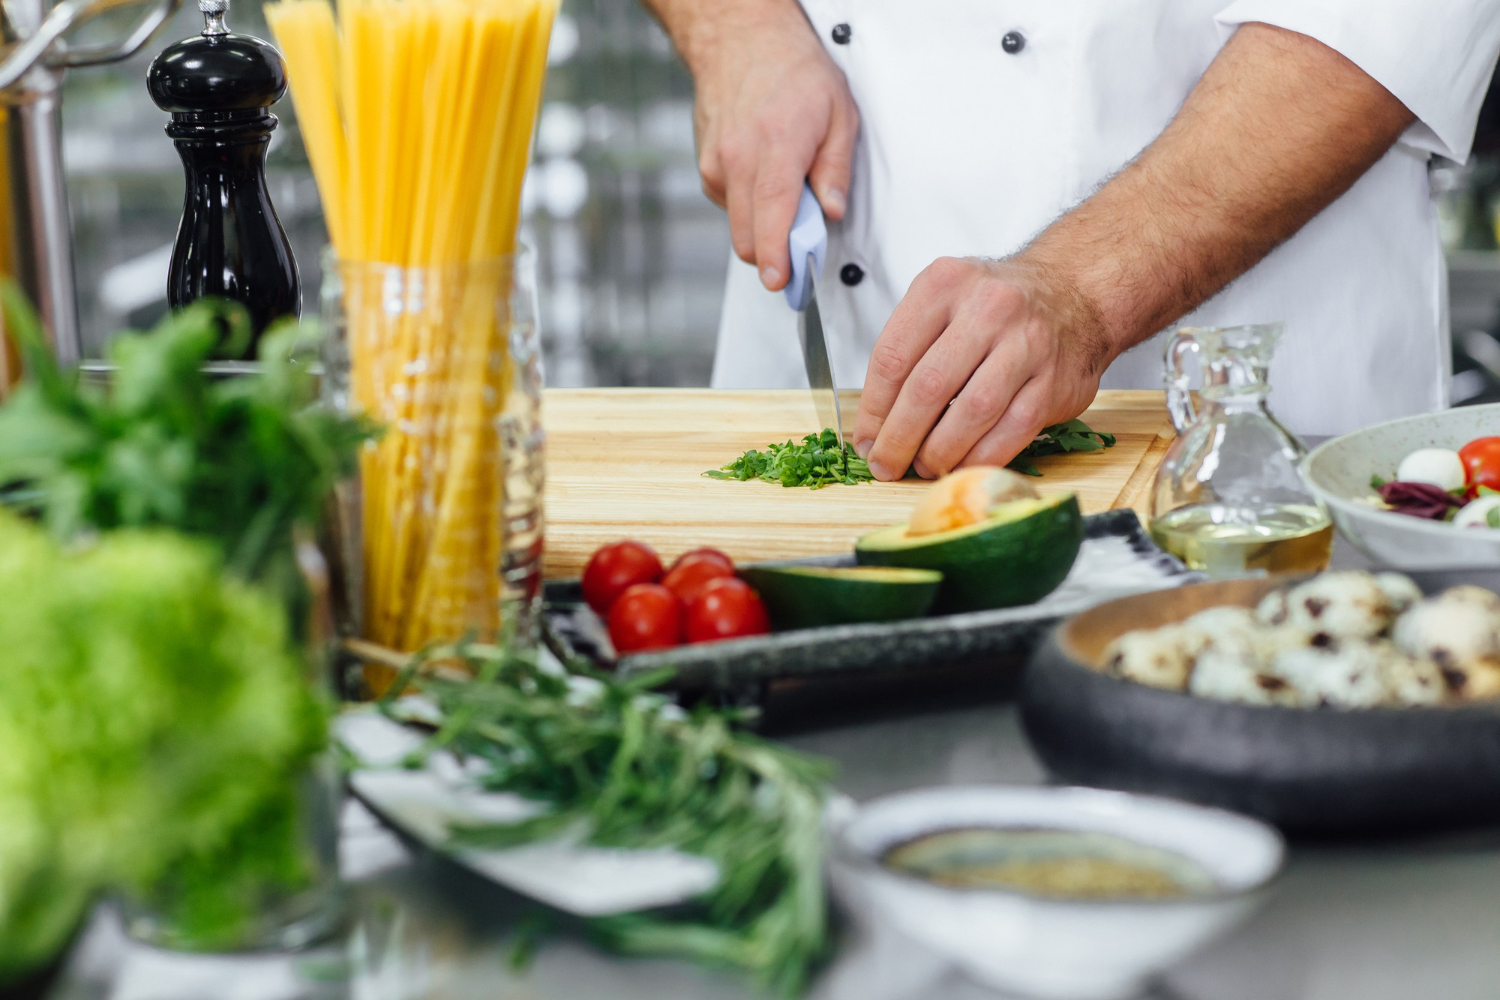 A chef in the kitchen of a restaurant chopping herbs on a cutting board, surrounded by pasta, greens and other fresh food.